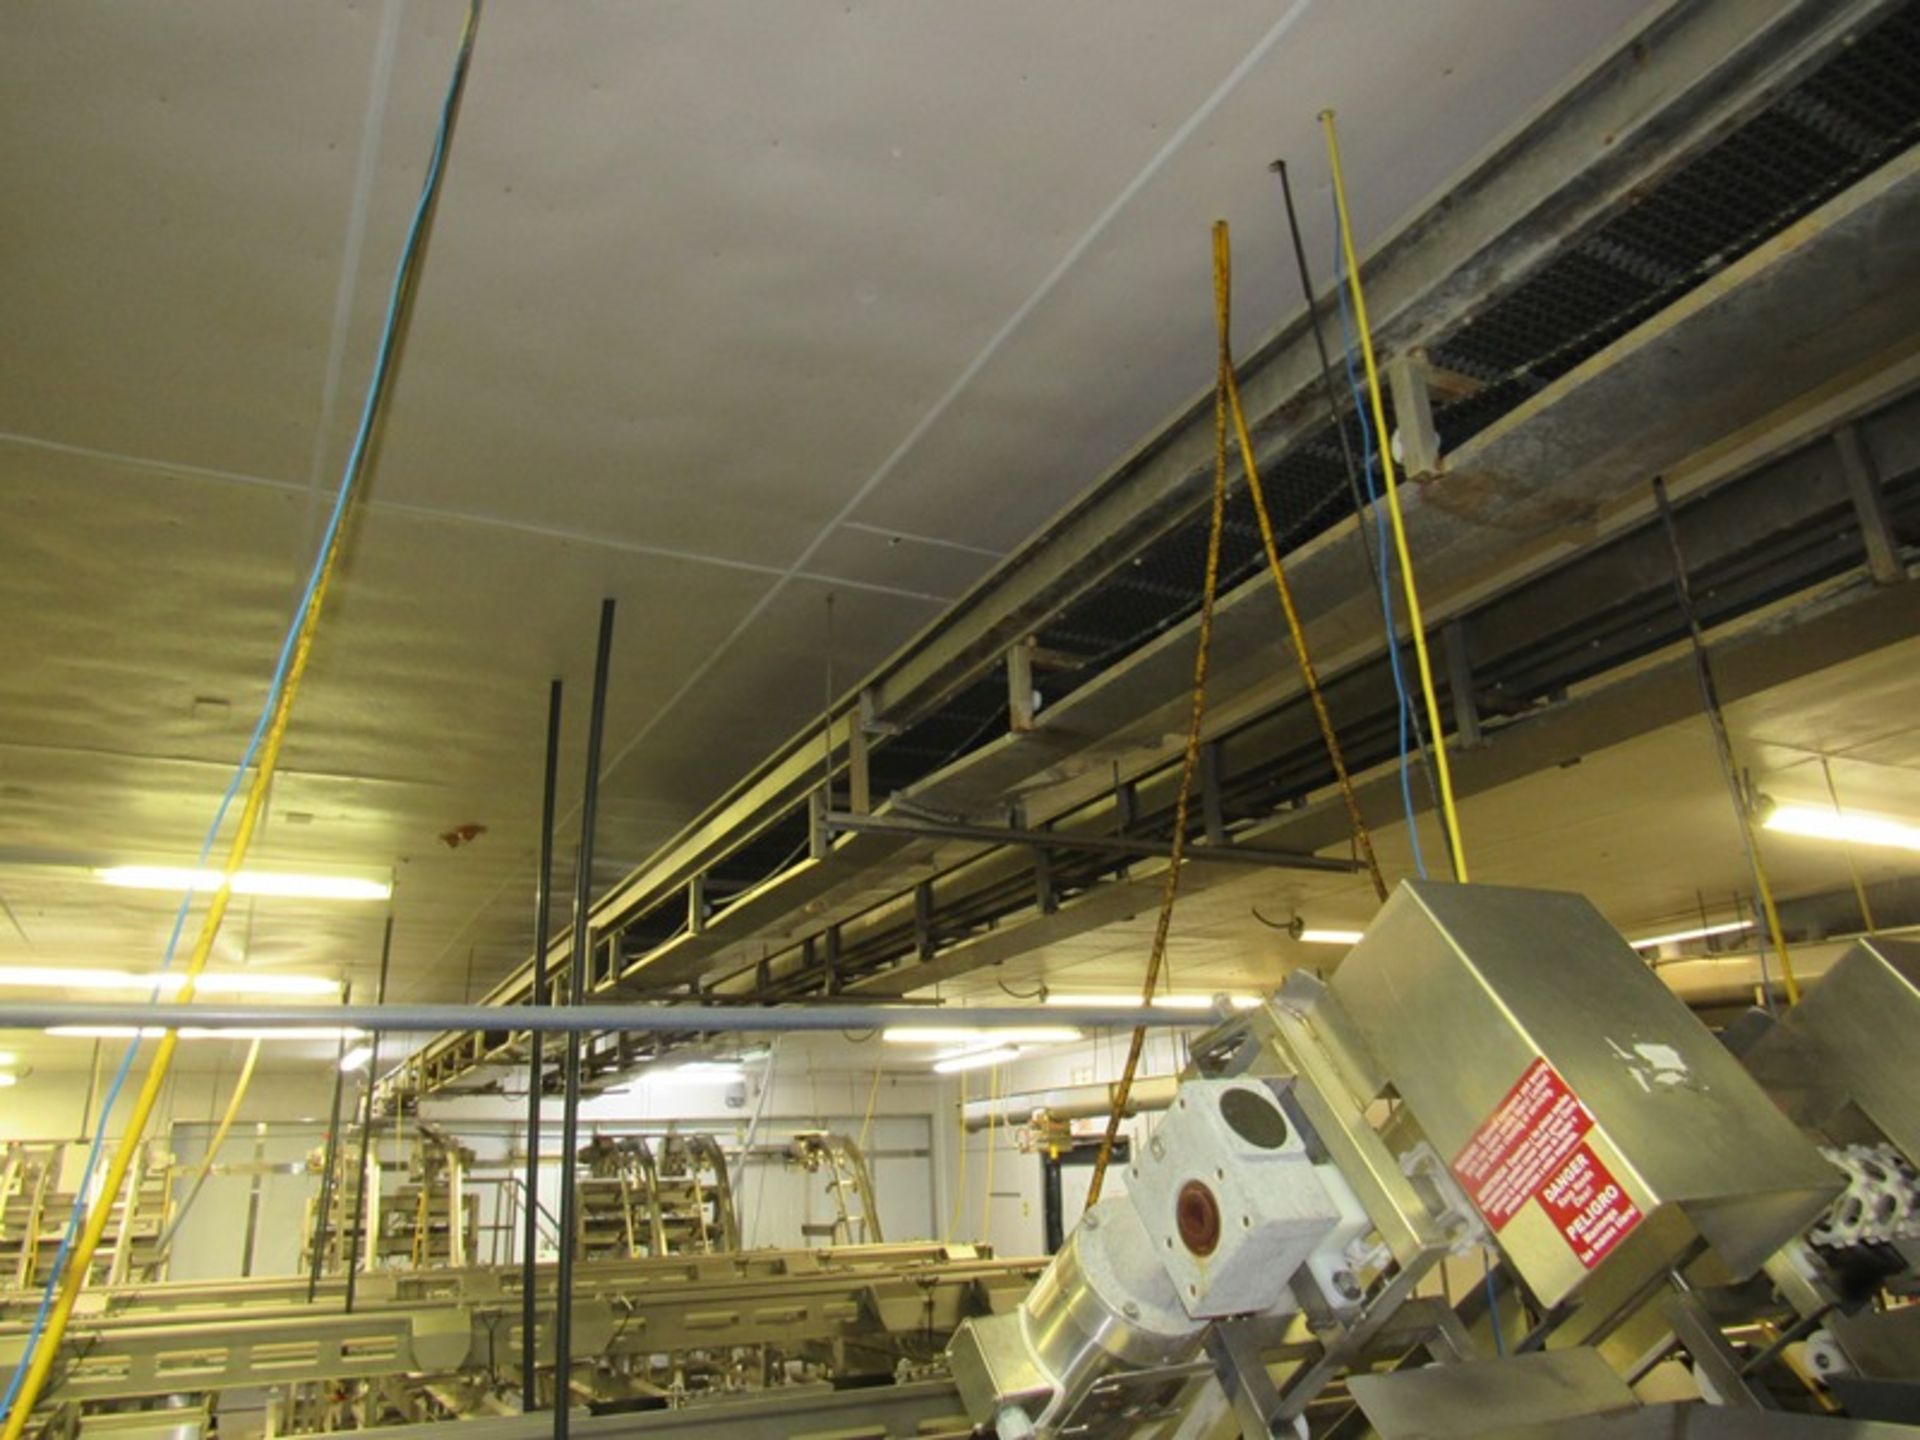 Stainless Steel Ceiling Suspend Conveyor, 6" W X 36' L, 1 h.p. motor (Required Loading Fee $1,000.00 - Image 3 of 6